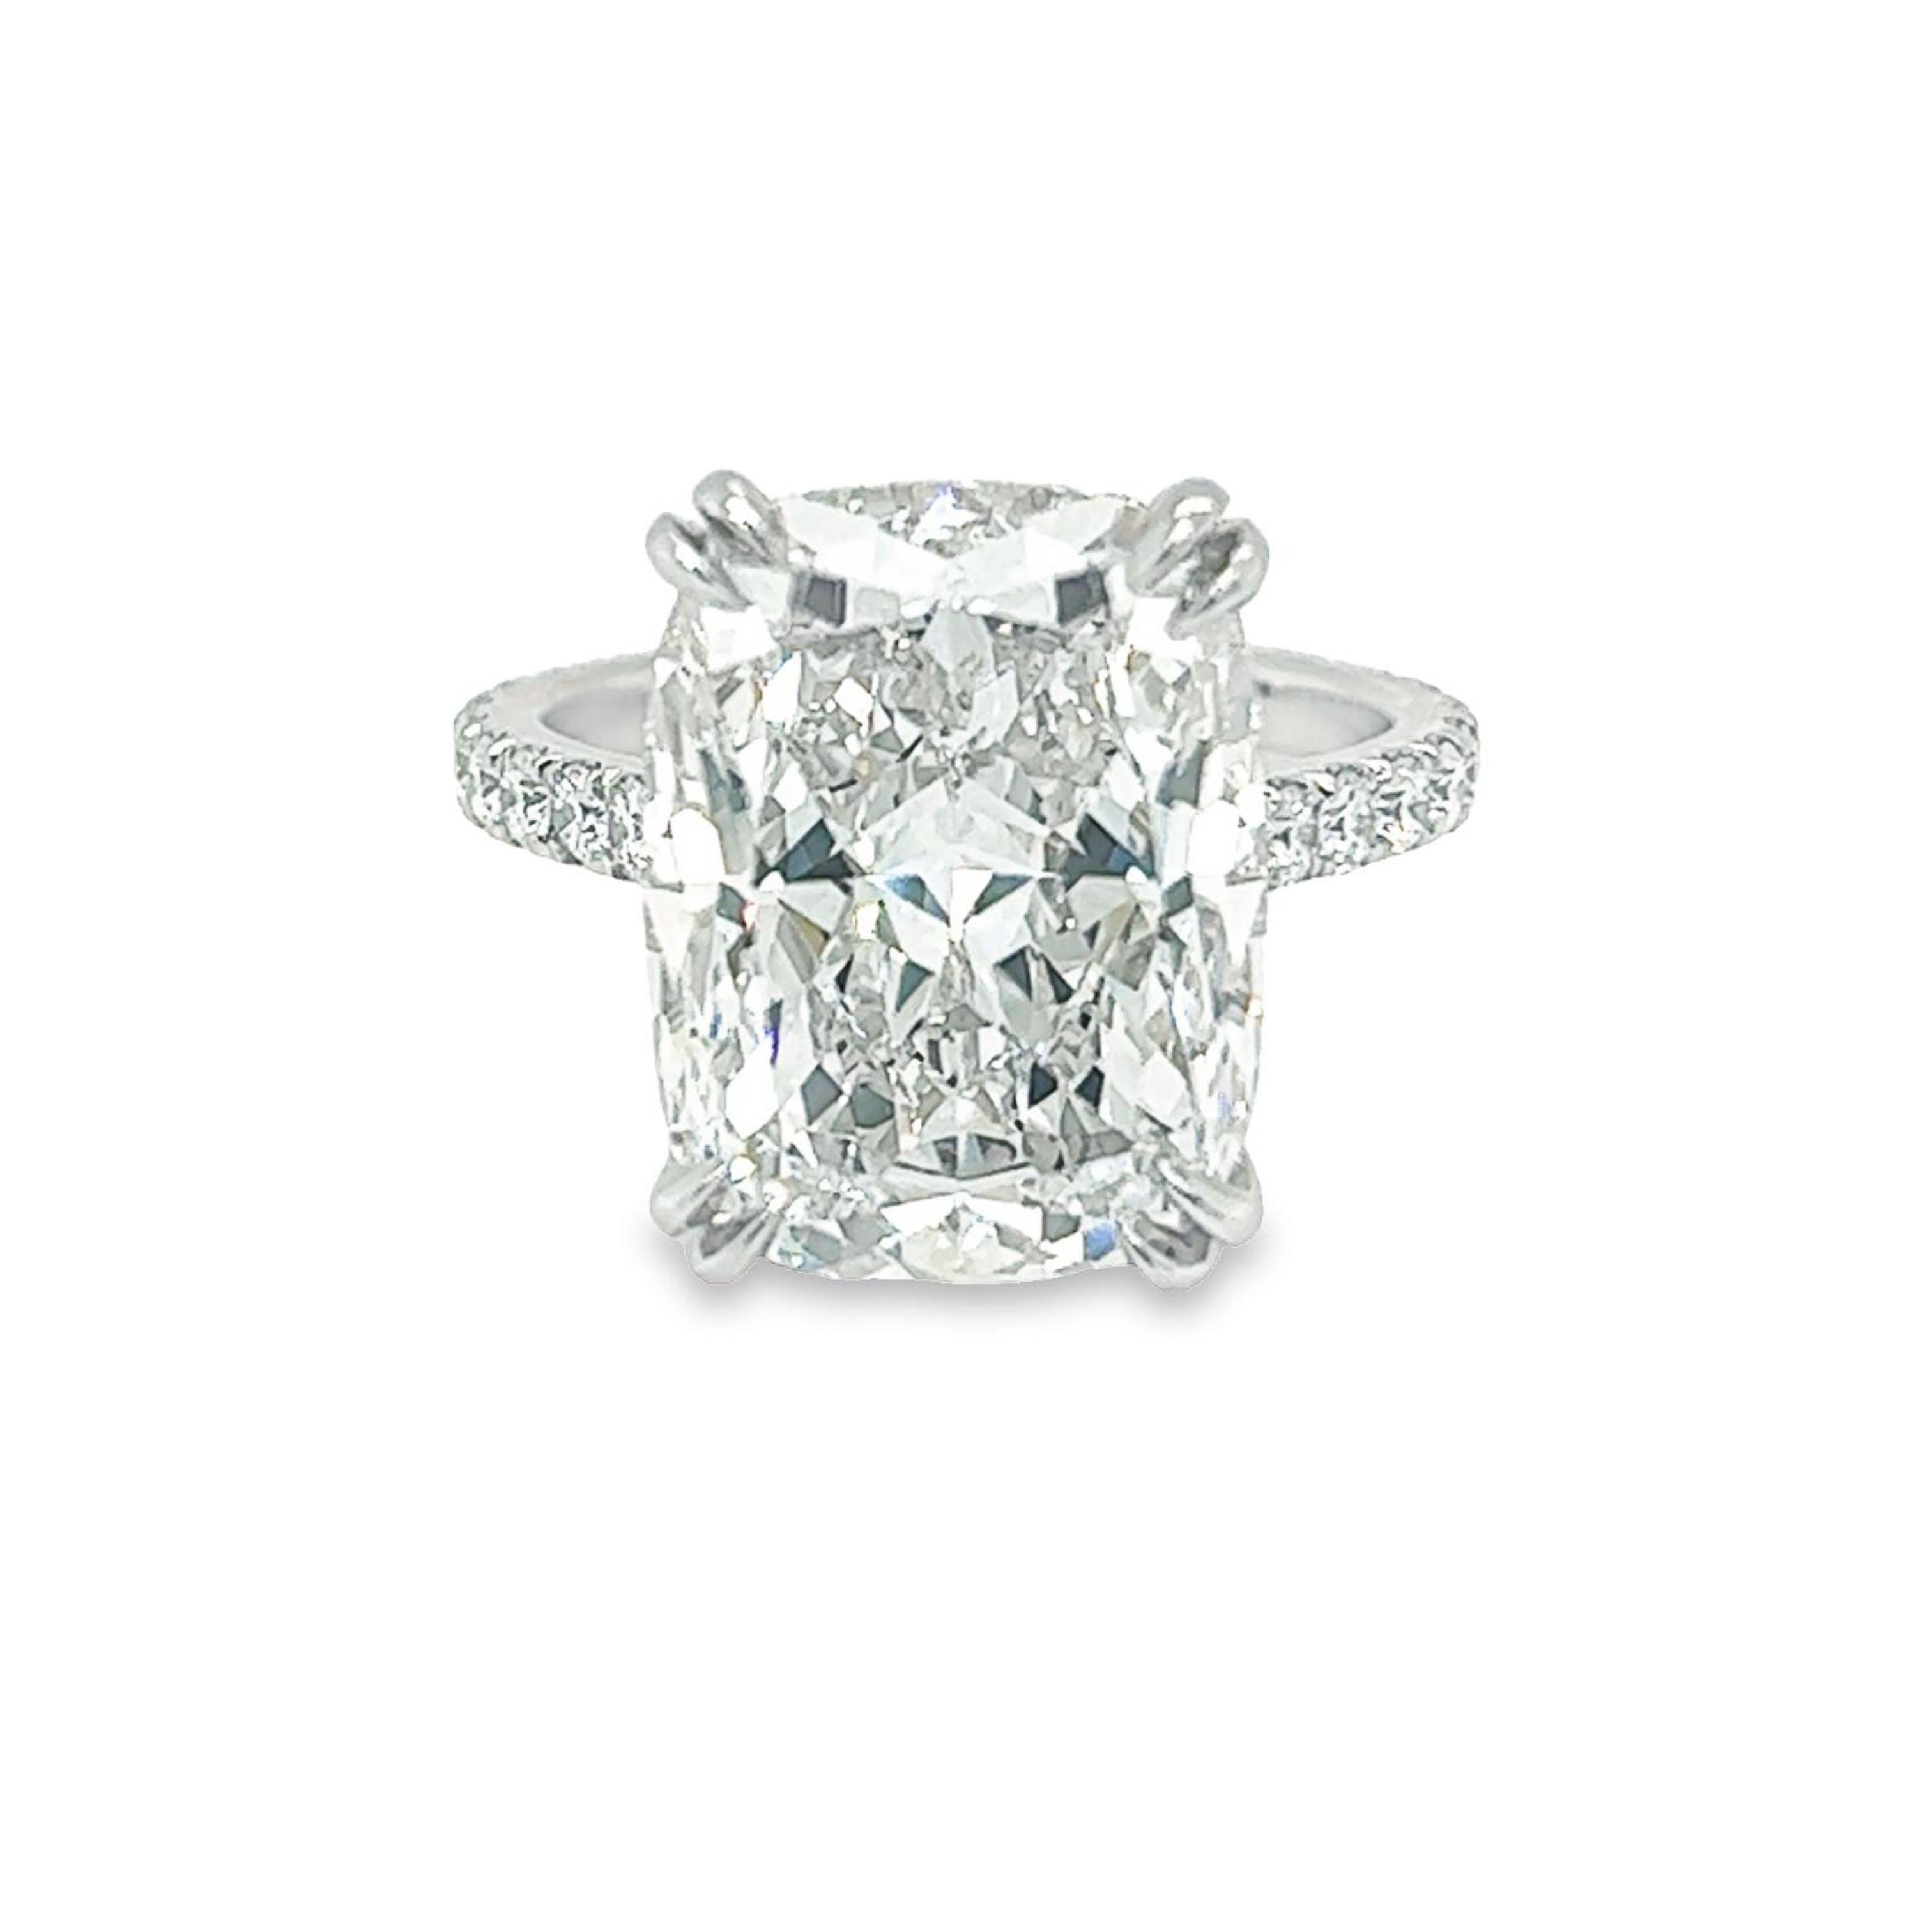 Rosenberg Diamonds & Co. 10.07 carat Cushion cut F color VVS1 clarity is accompanied by a GIA certificate. This spectacular elongated Cushion is full of brilliance and is set in a handmade platinum setting. This ring continues its elegance with